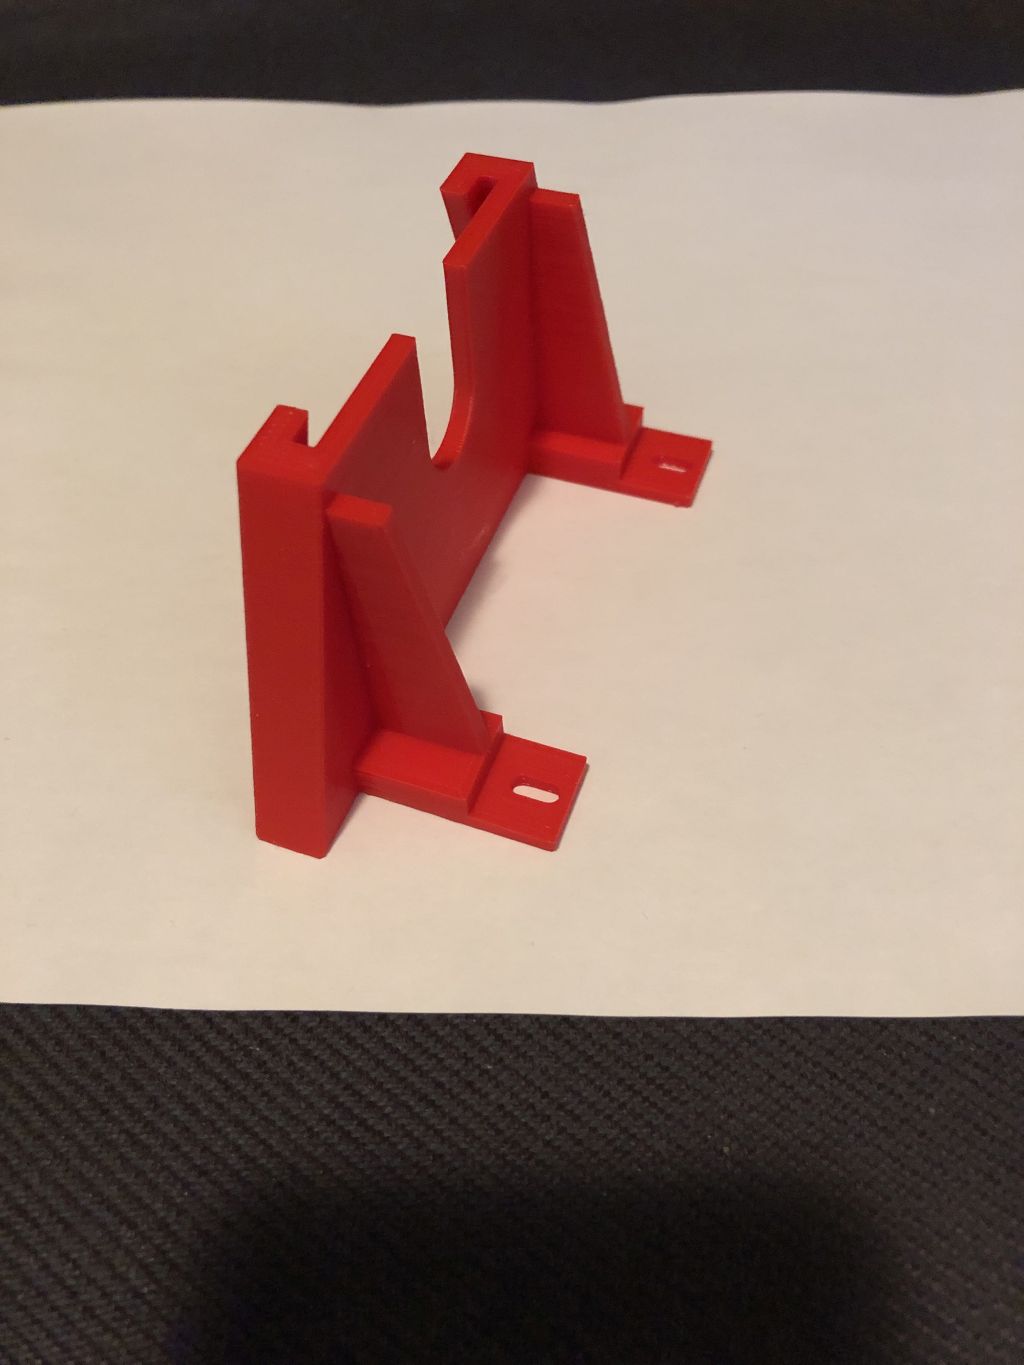 Second 3d printed prototype attachment